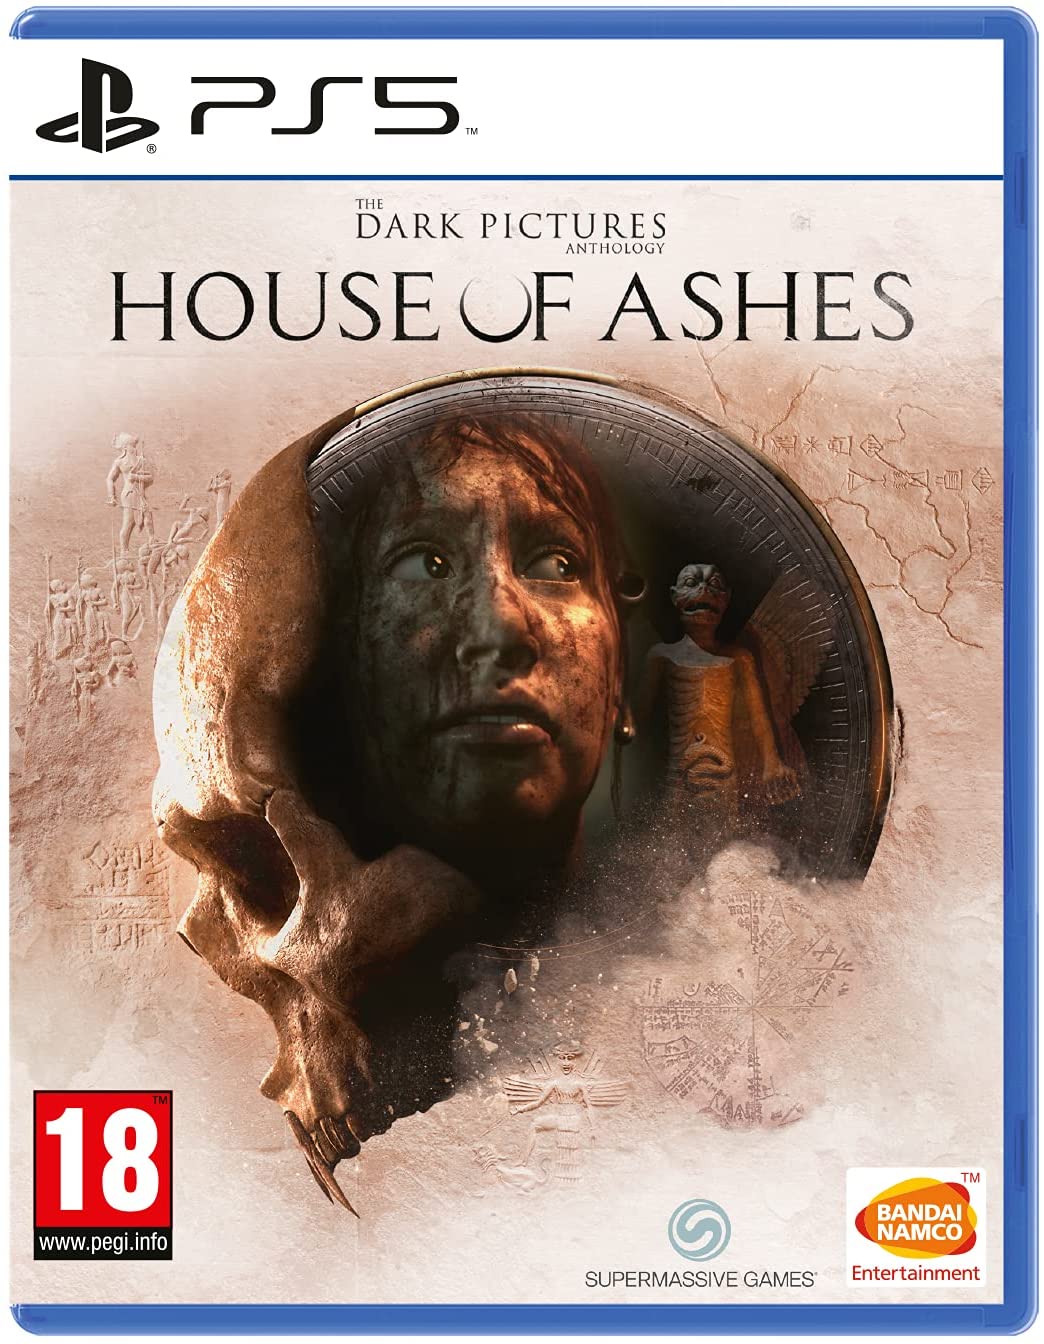 The Dark Pictures Anthology: House of Ashes PSN Download Key (Playstation 5)